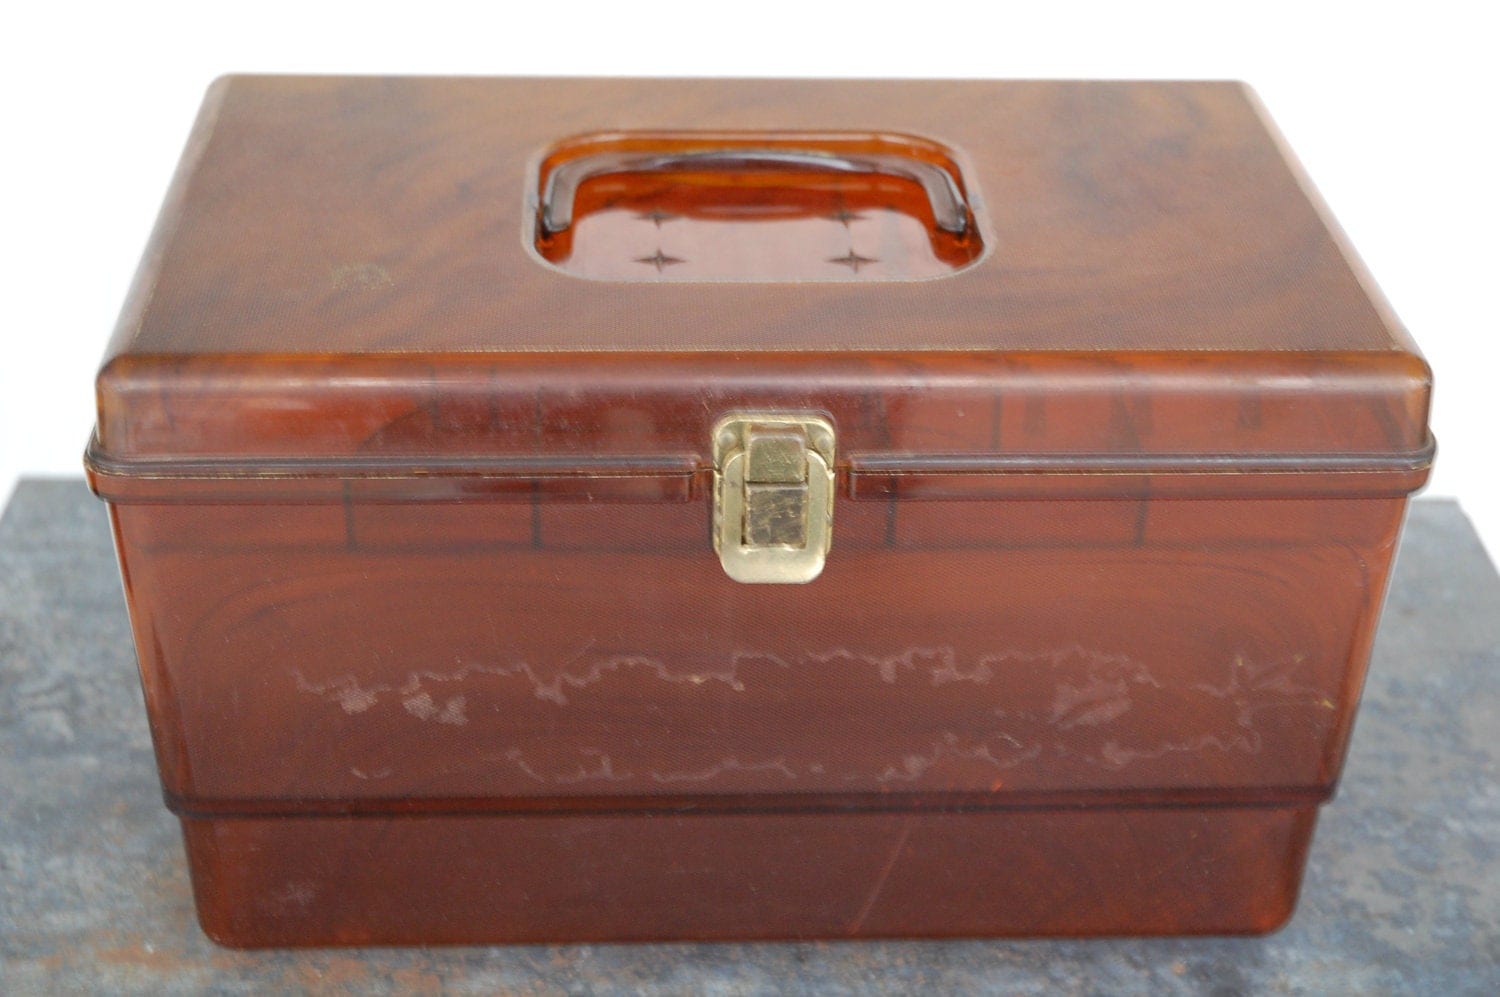 Vintage Sewing Box Plastic Amber Colored On Sale